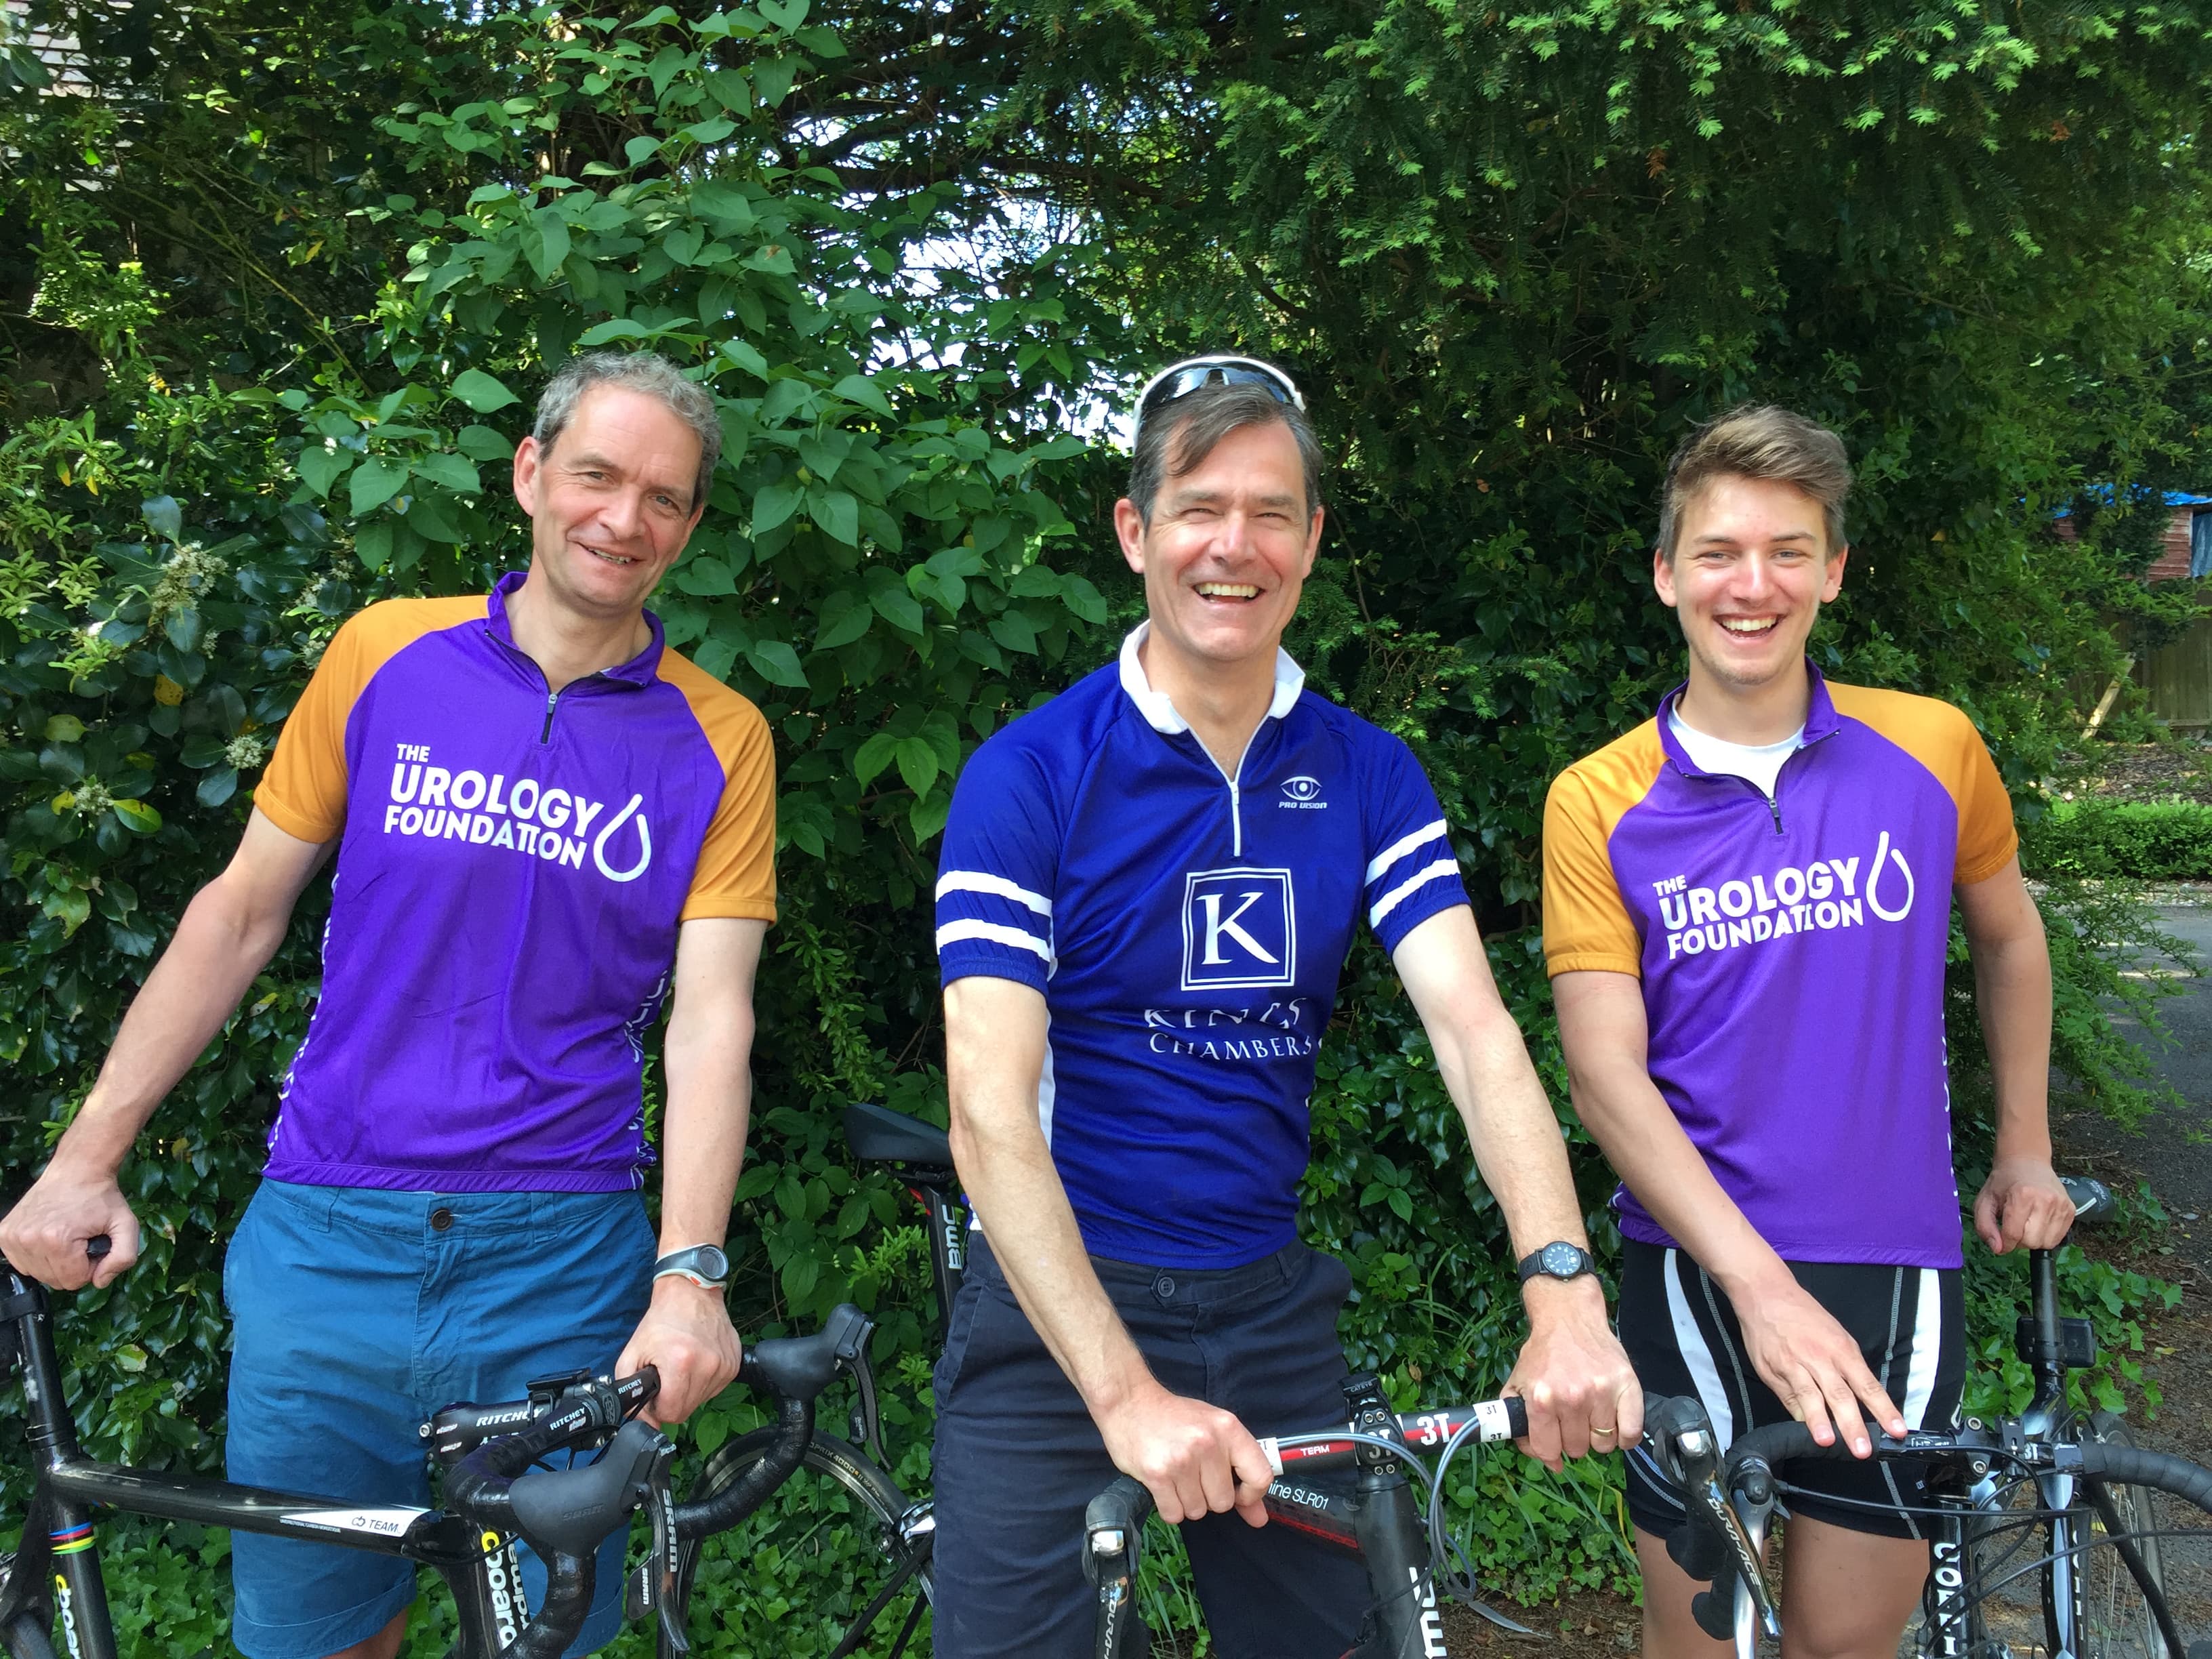 Planning Barrister Gary Grant set to Cycle 100 miles for The Urology FoundationCSR